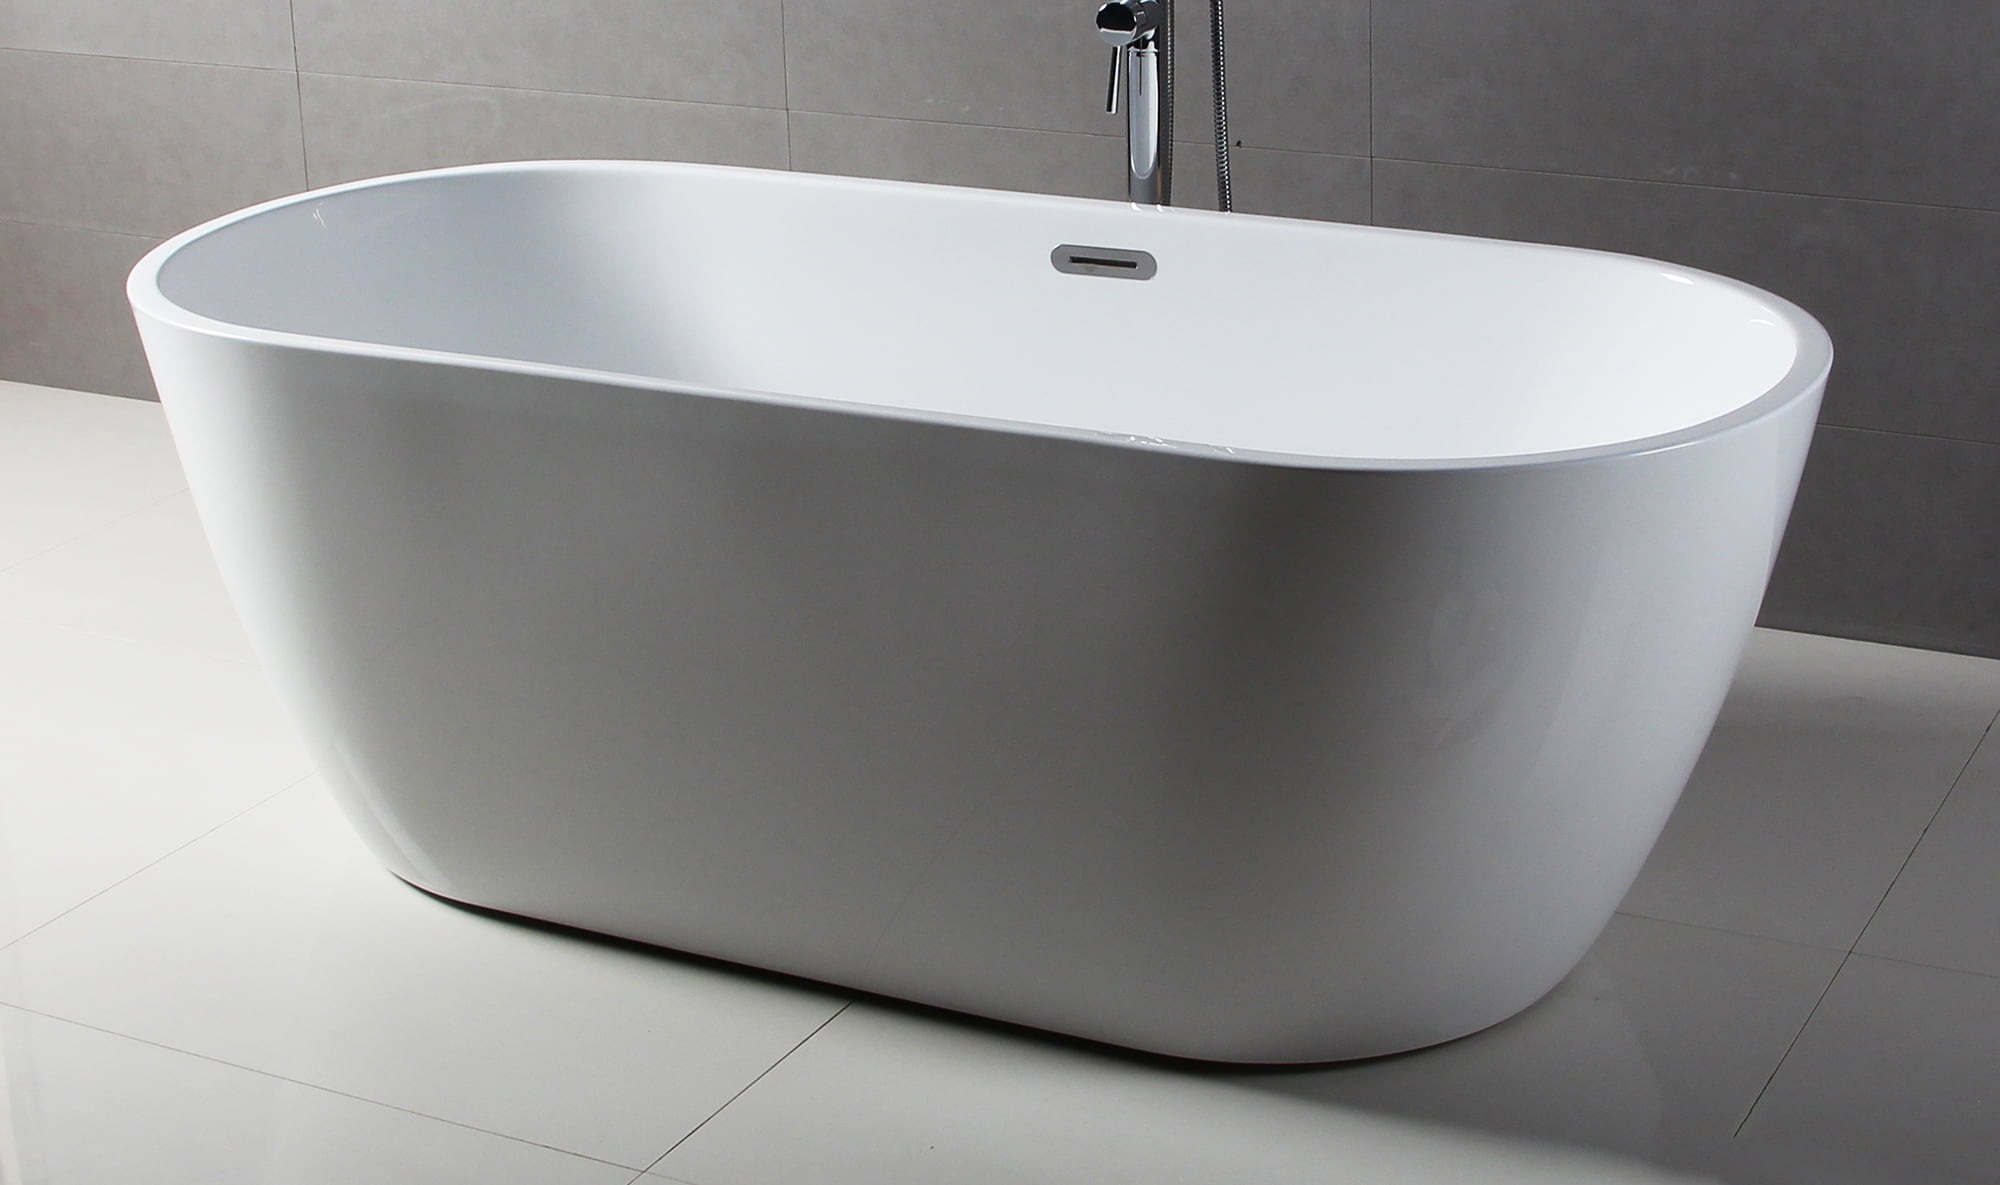 Made-to-Order 67 in. White Oval Acrylic Free Standing Soaking Bathtub